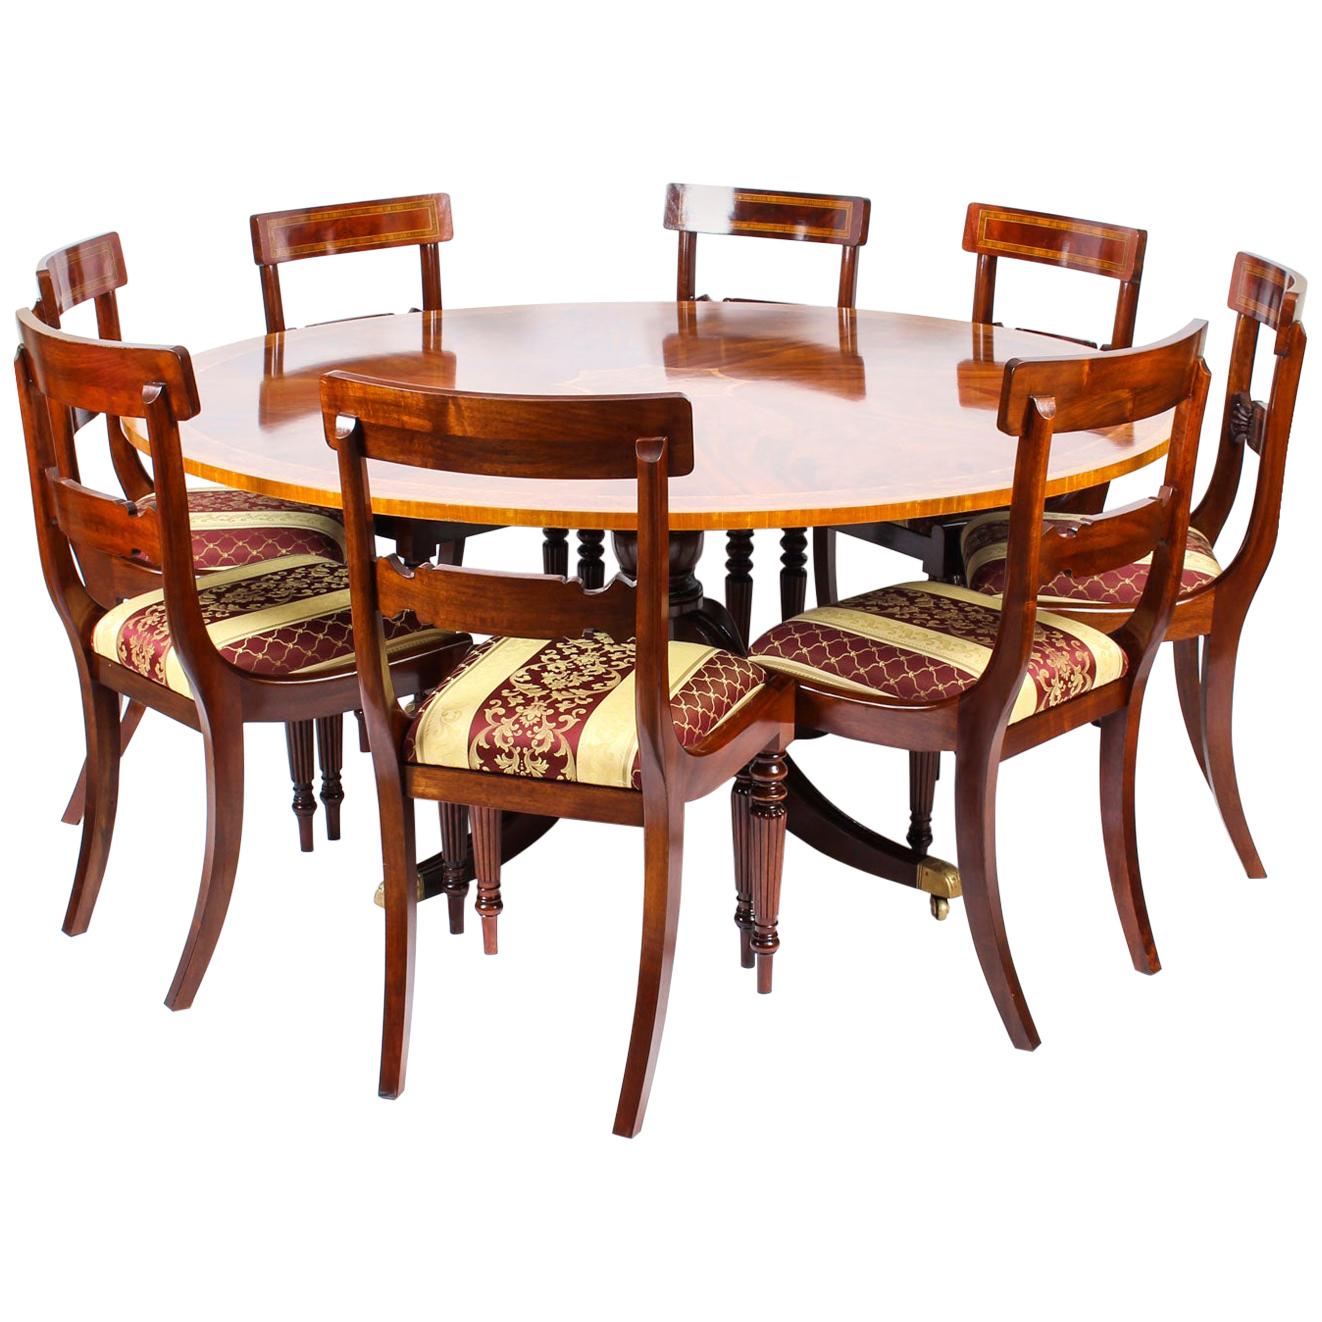 Vintage Regency Revival Dining Table and 8 Chairs, 20th Century